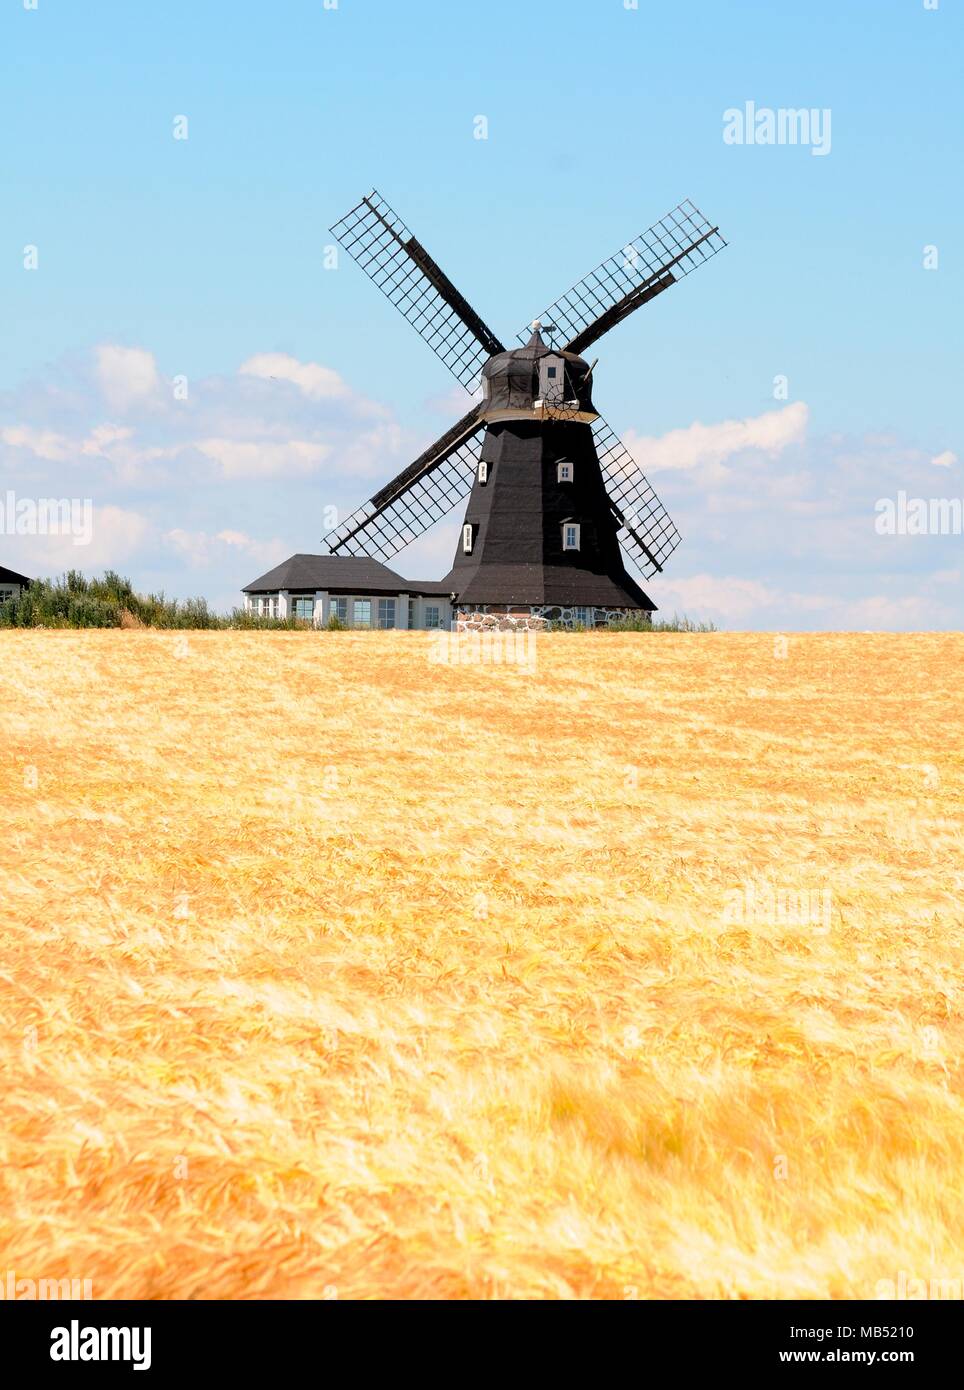 Windmill in a field of corn, Smedstorp, Scania, Sweden Stock Photo